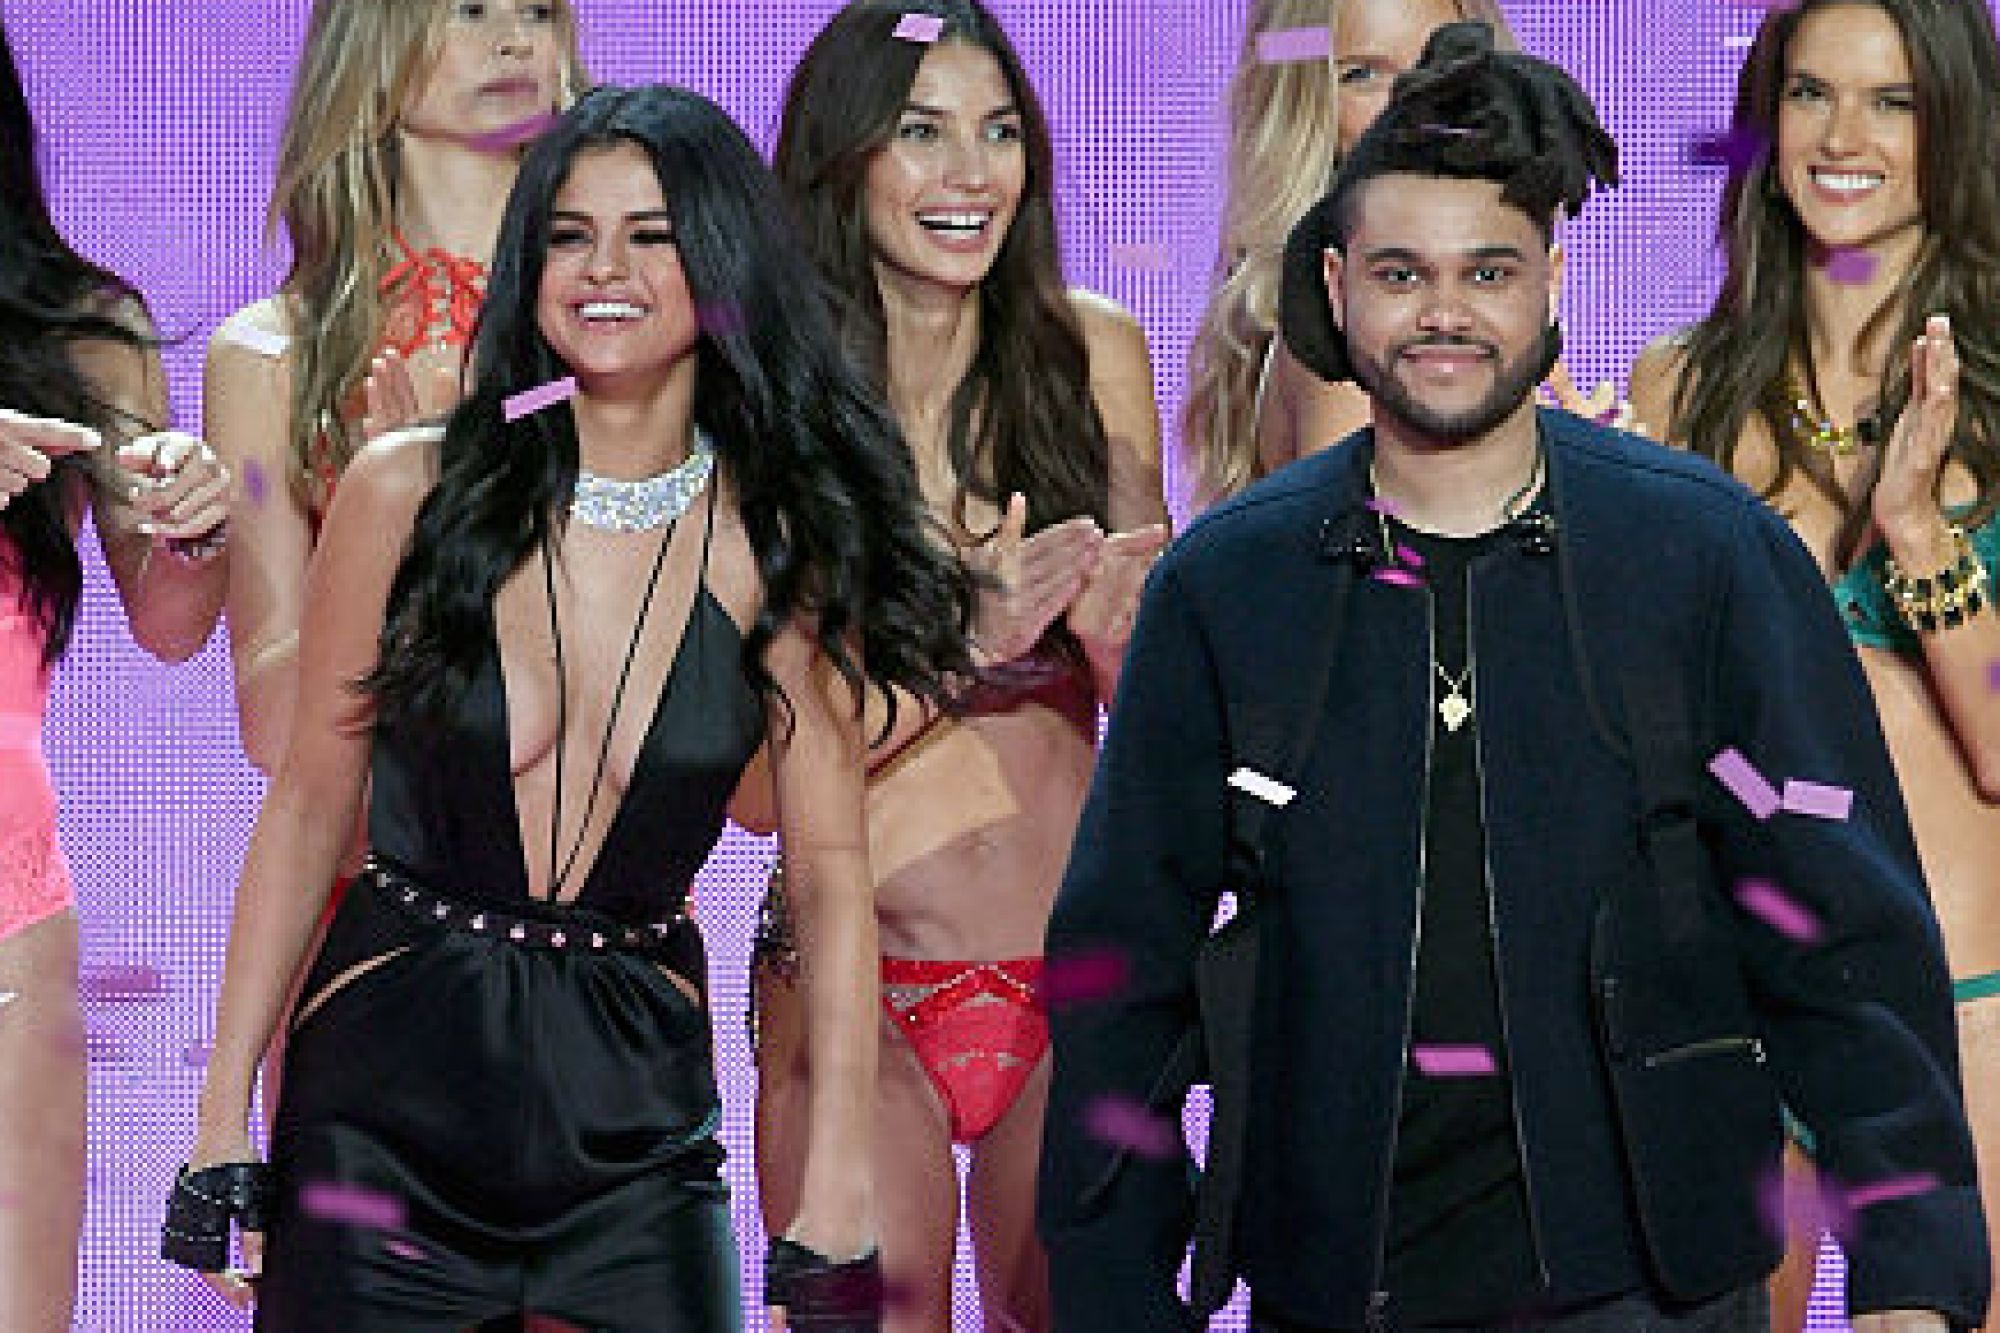 Selena Gomez and The Weeknd Performing on Stage together!!!